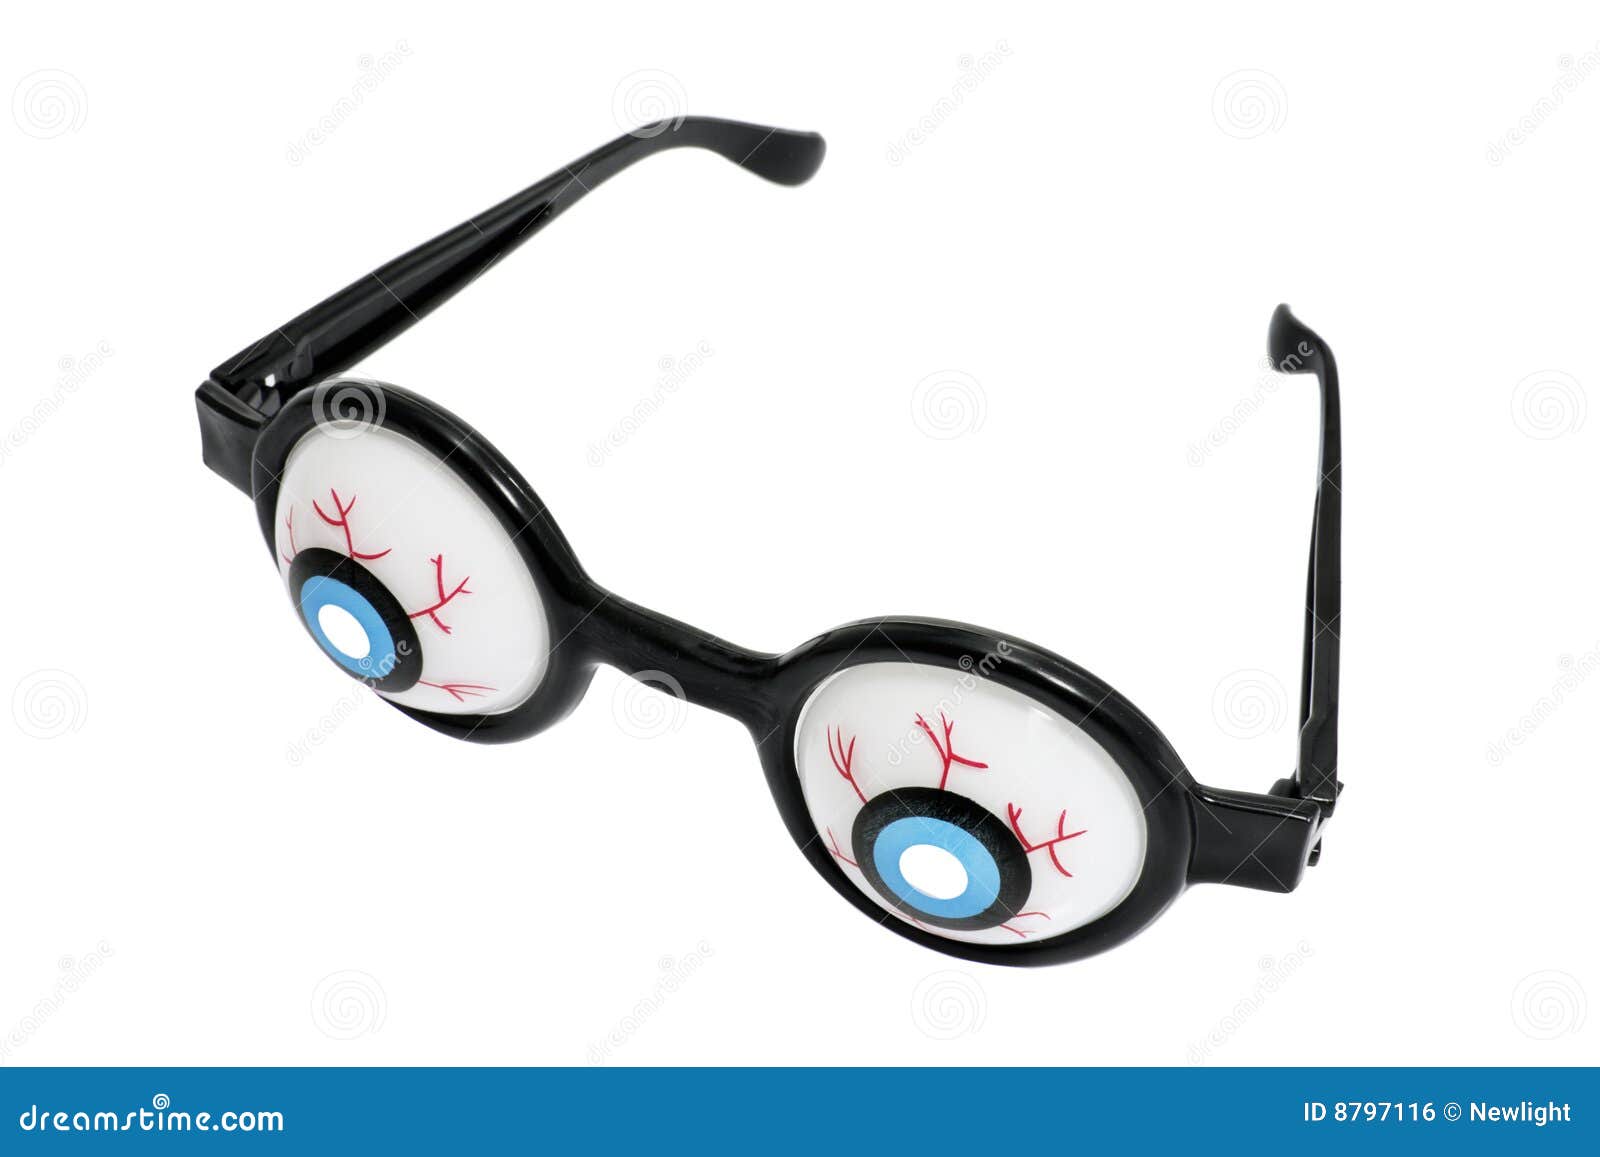 novelty spectacles